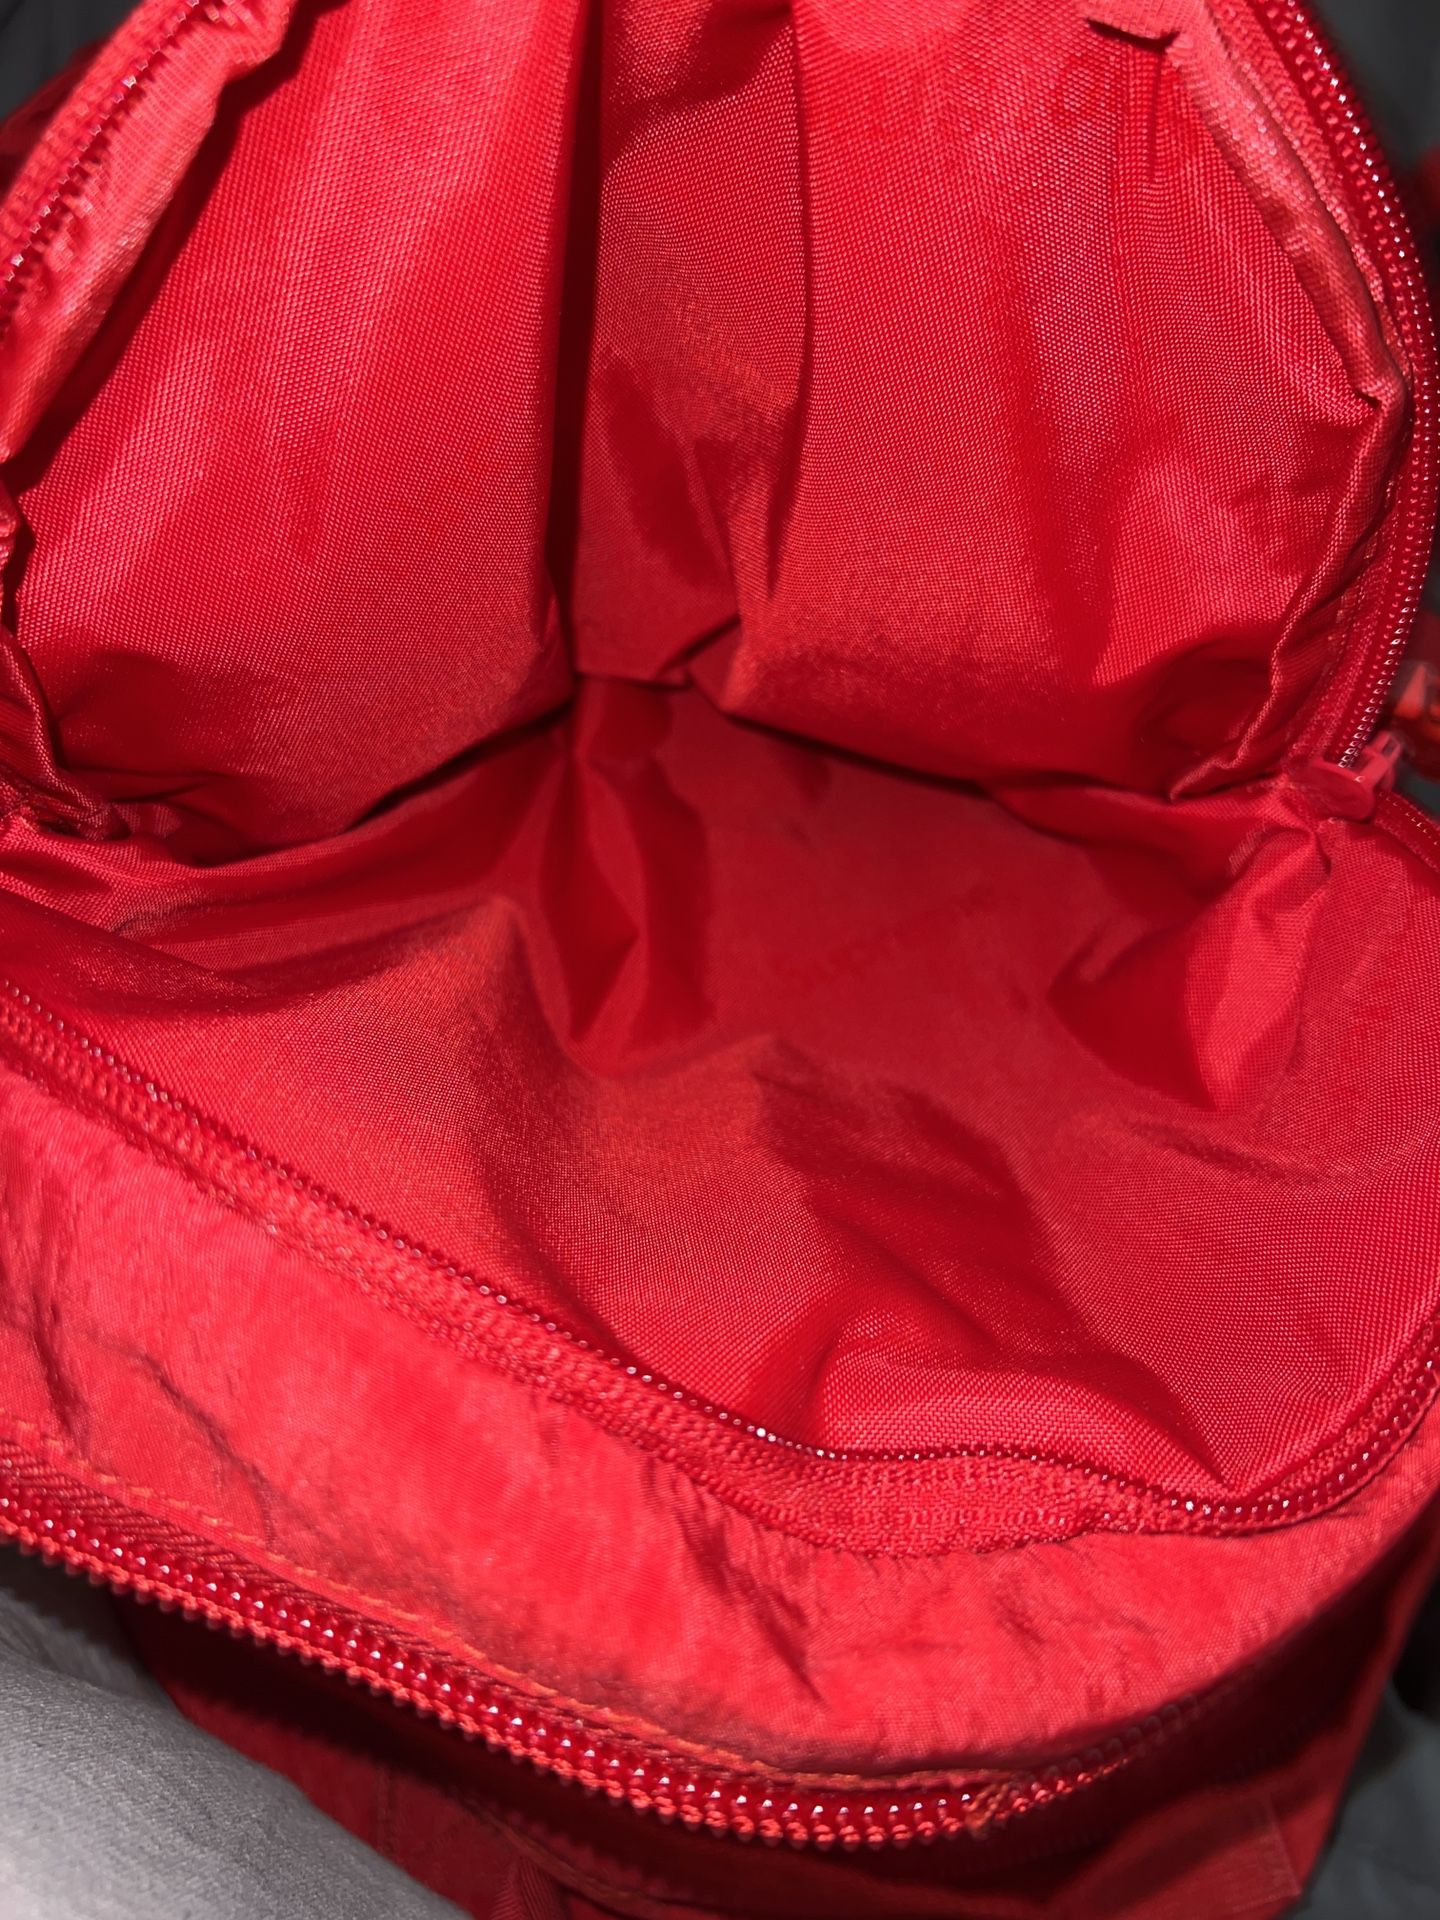 Supreme Backpack (SS20) Red for Sale in Chico, CA - OfferUp